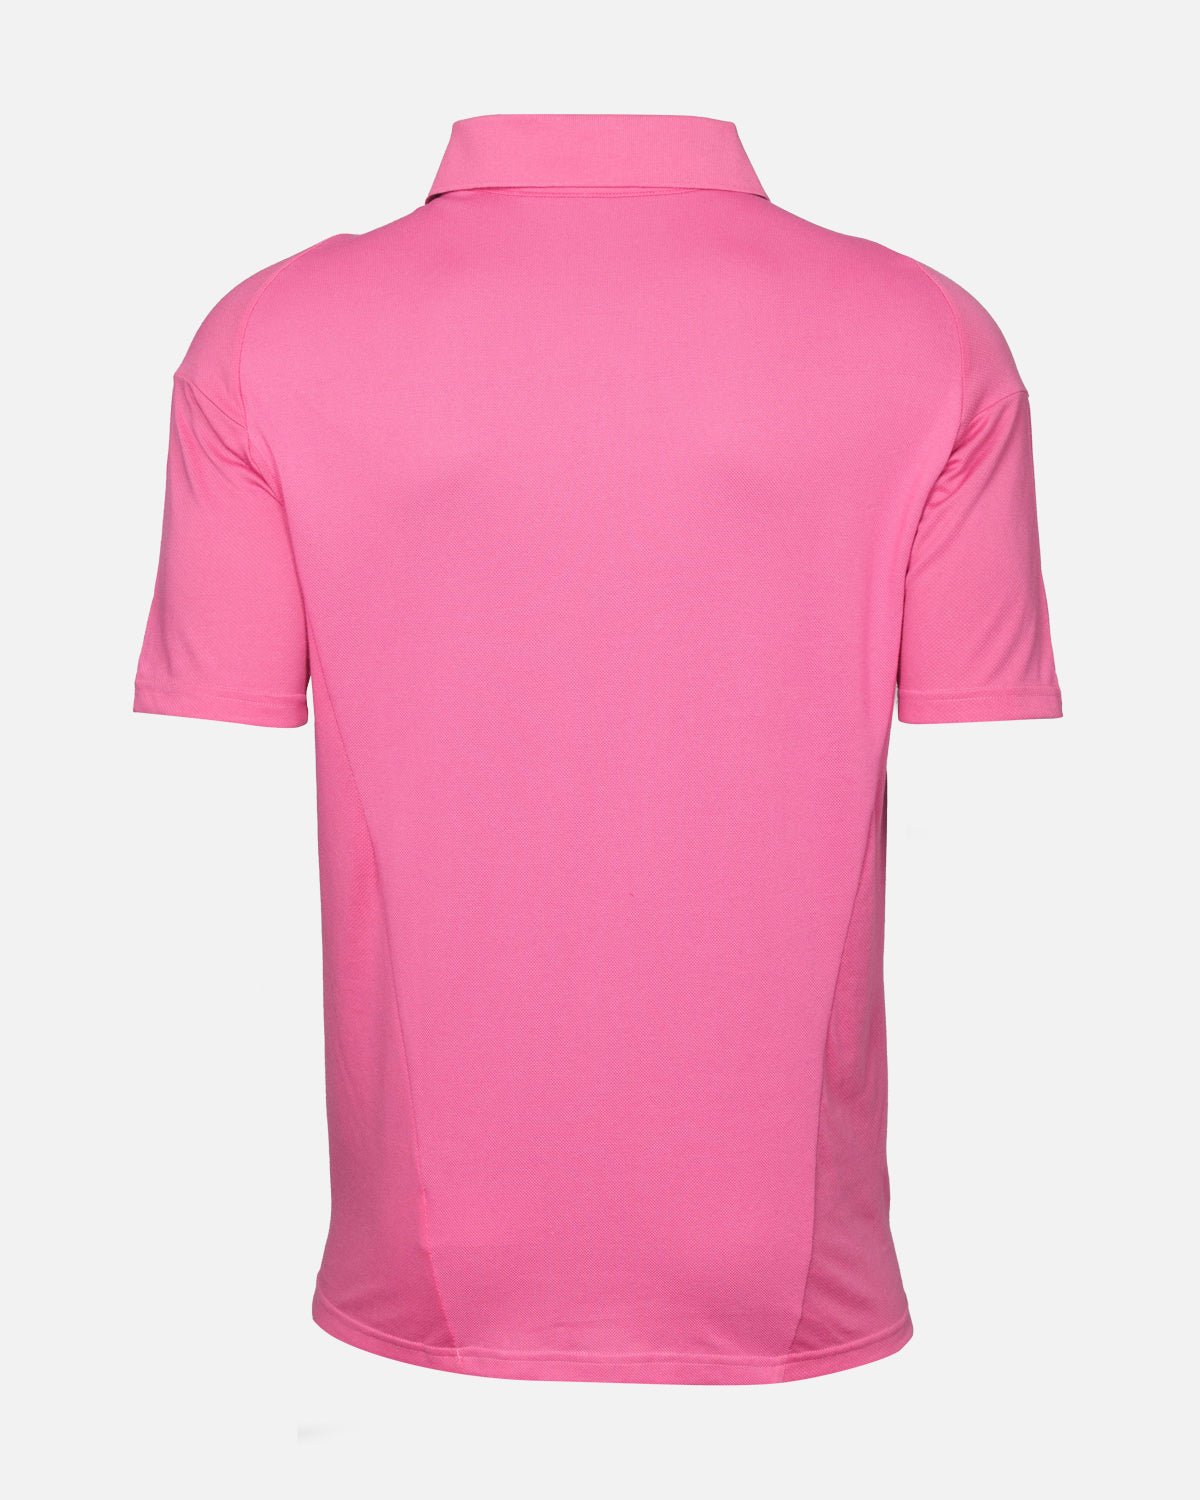 NFFC Pink Warm Up Polo 23-24 - Nottingham Forest FC